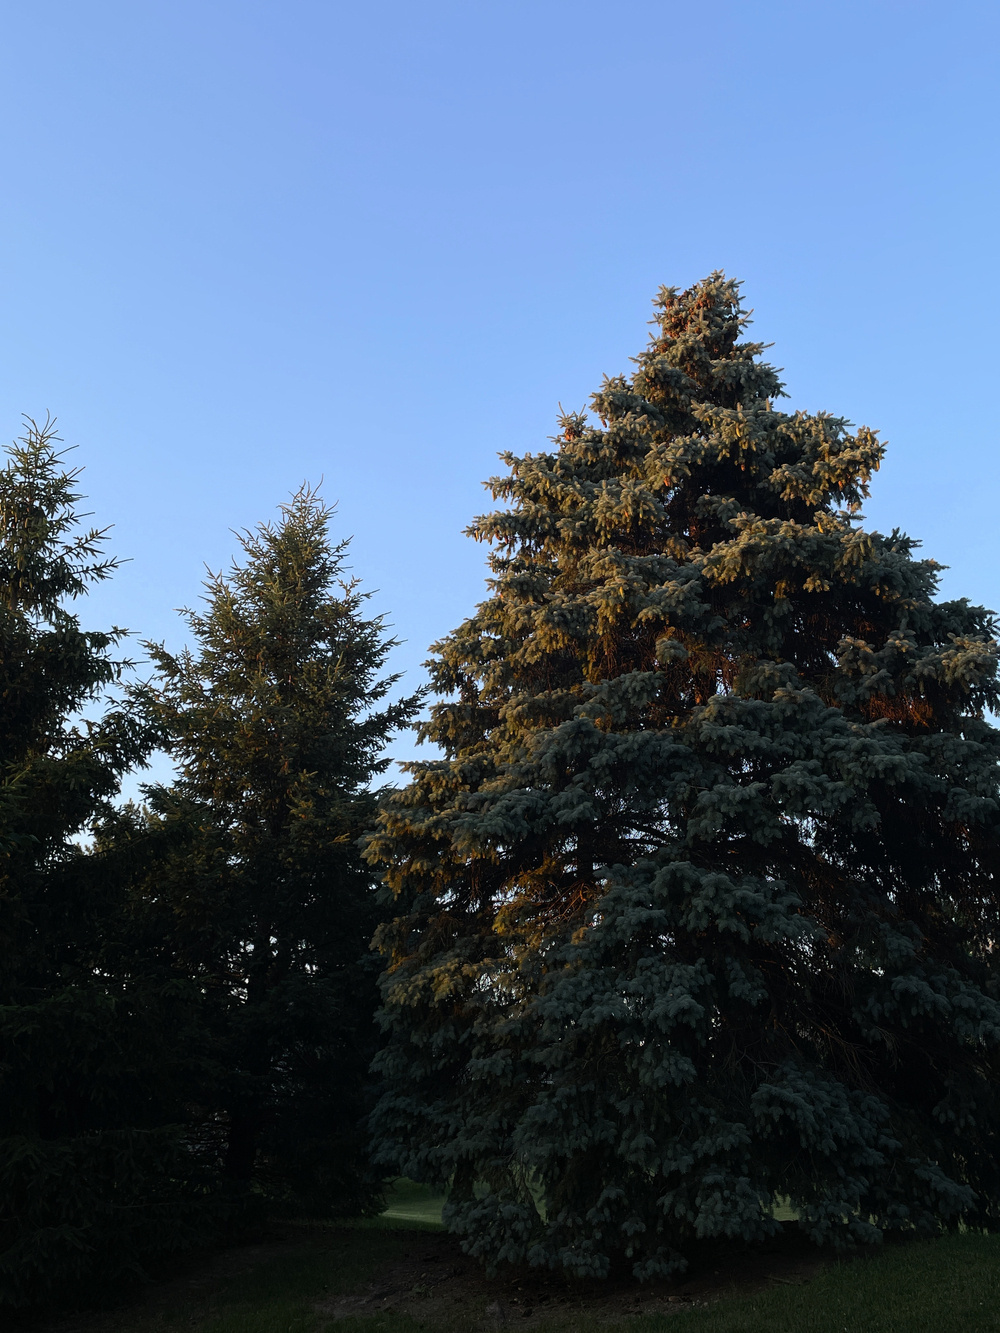 Orange sunlight setting on the top half of pine trees against a blue sky